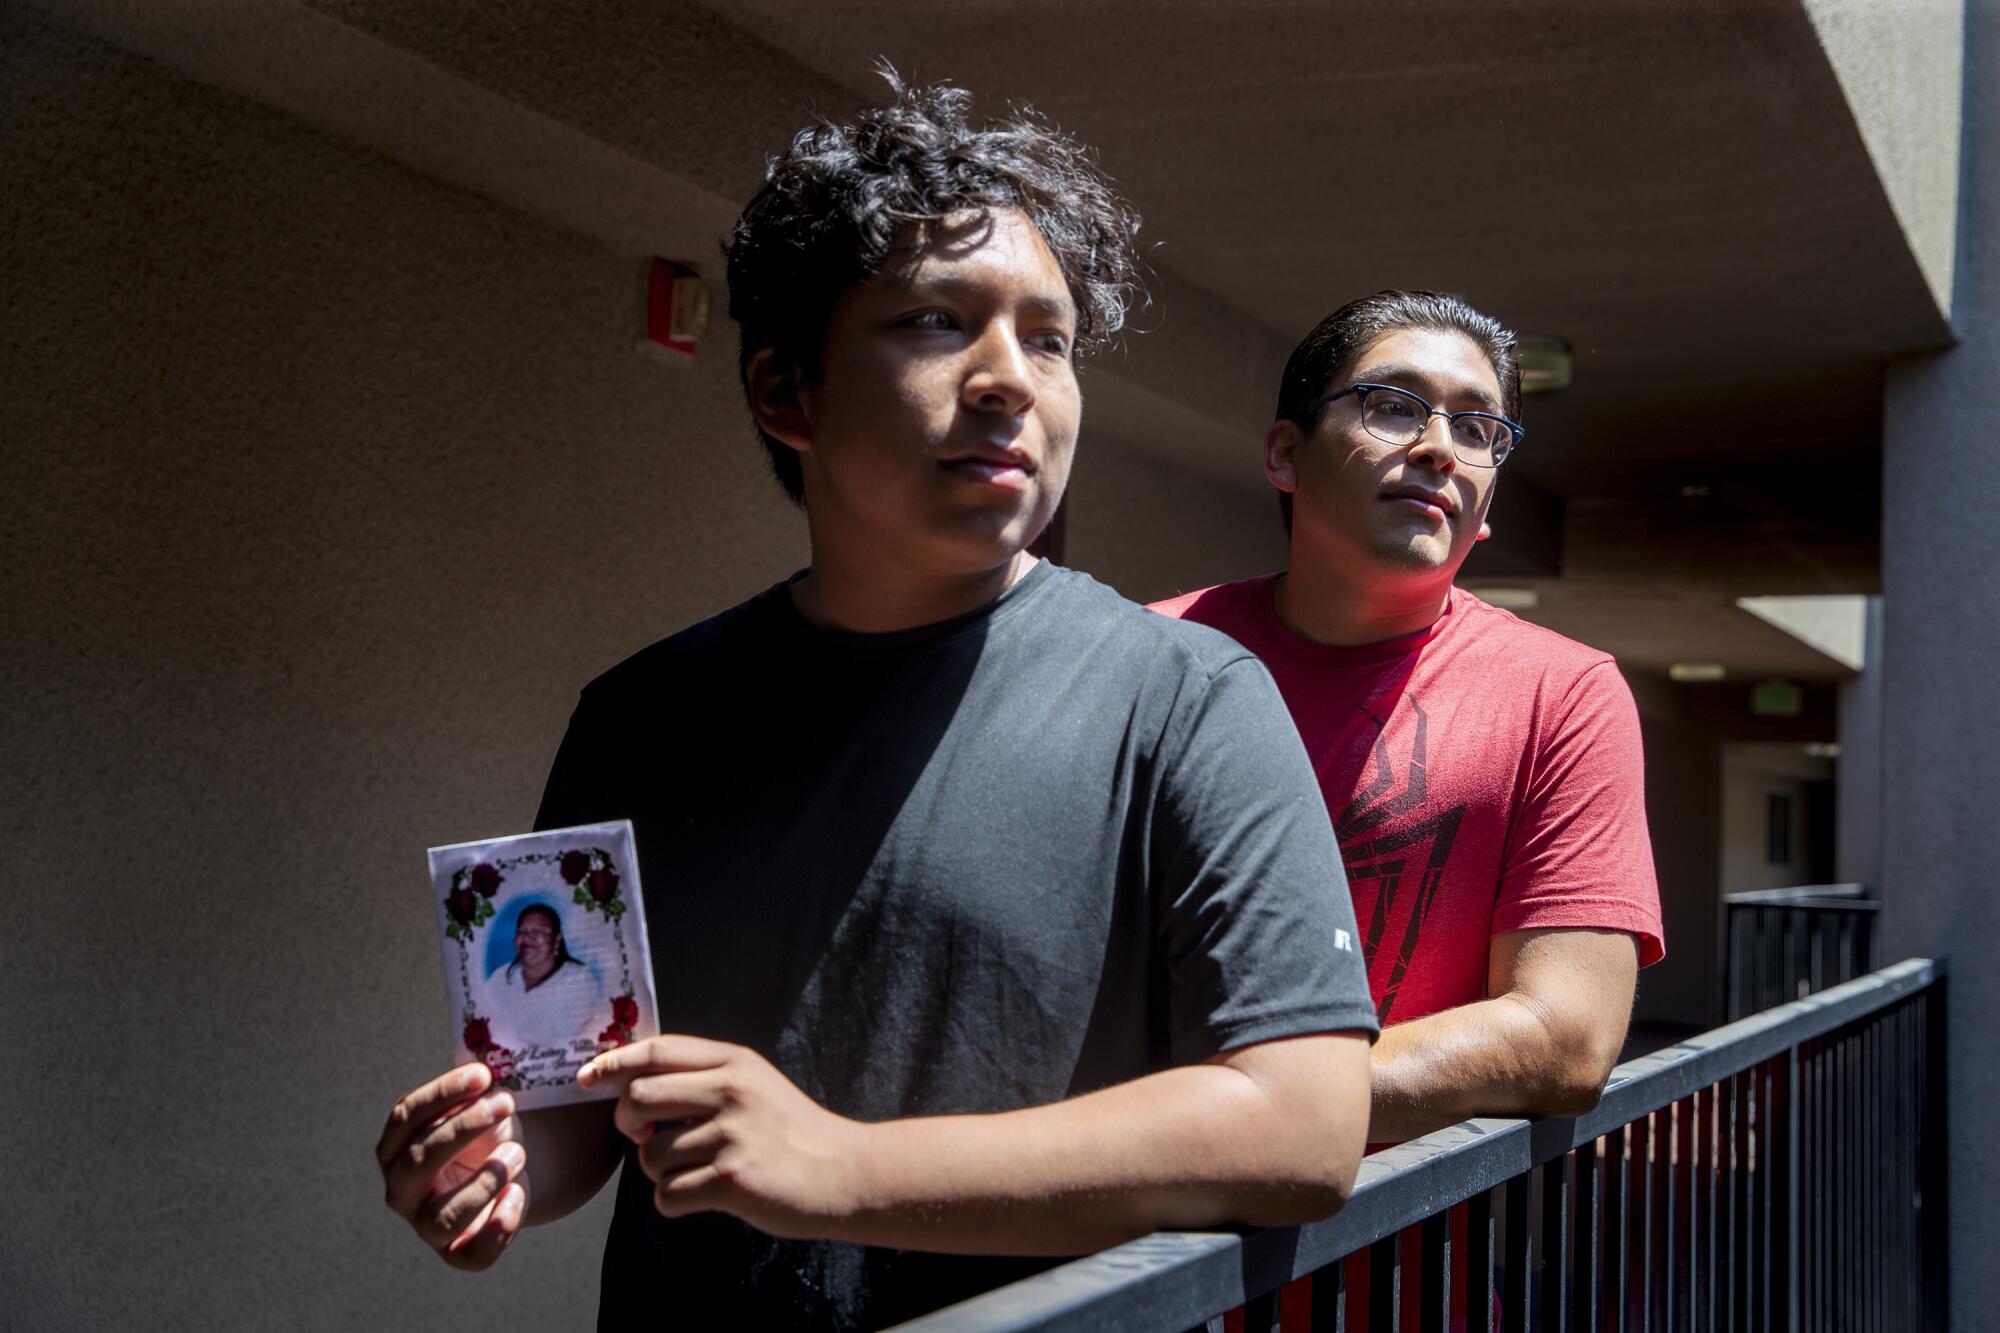 Two brothers pose for a portrait on an outdoor balcony, holding a photo of their late grandmother